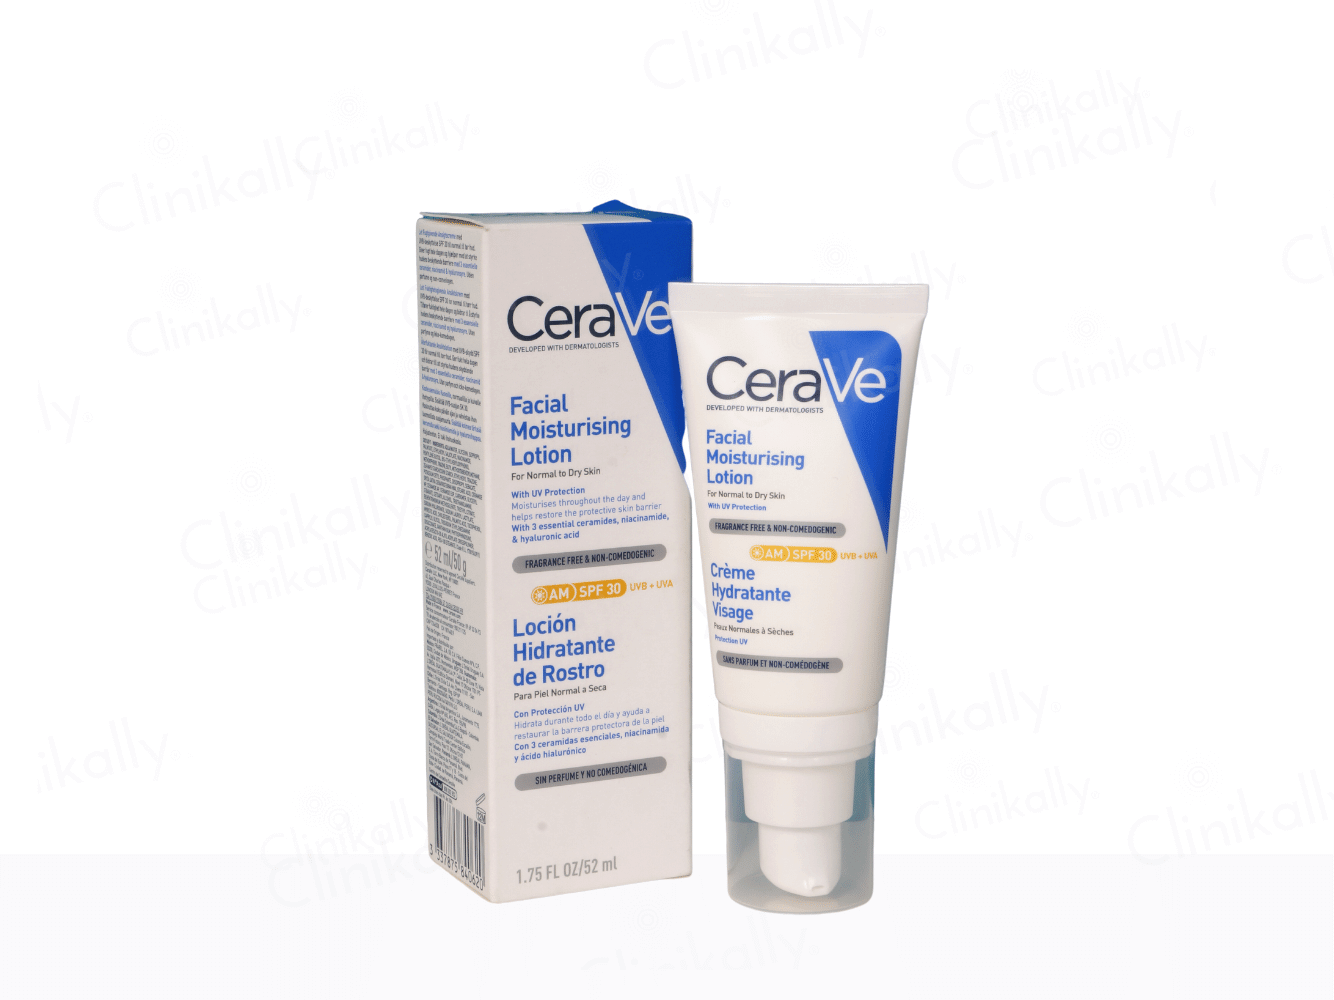 CeraVe AM Facial Moisturising Lotion for Normal to Dry Skin SPF 30) - Clinikally